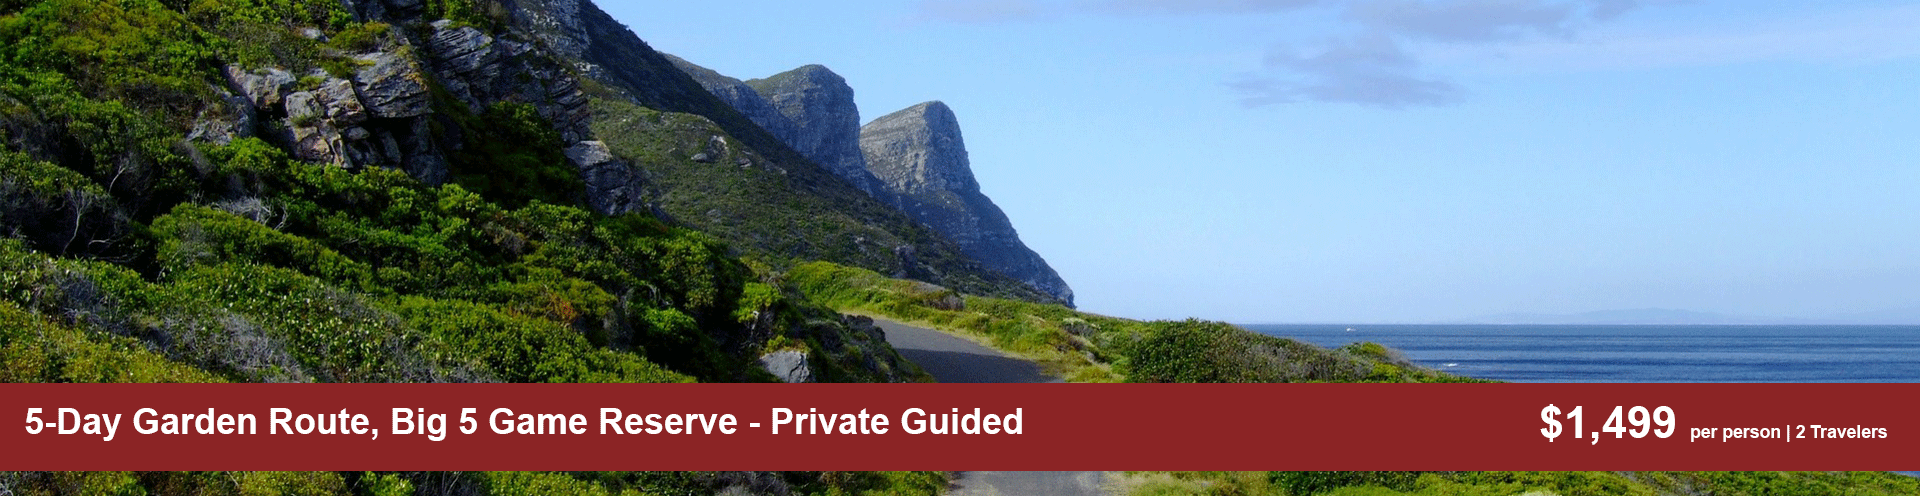 5-Day Garden Route, Big 5 Game Reserve - Private Guided